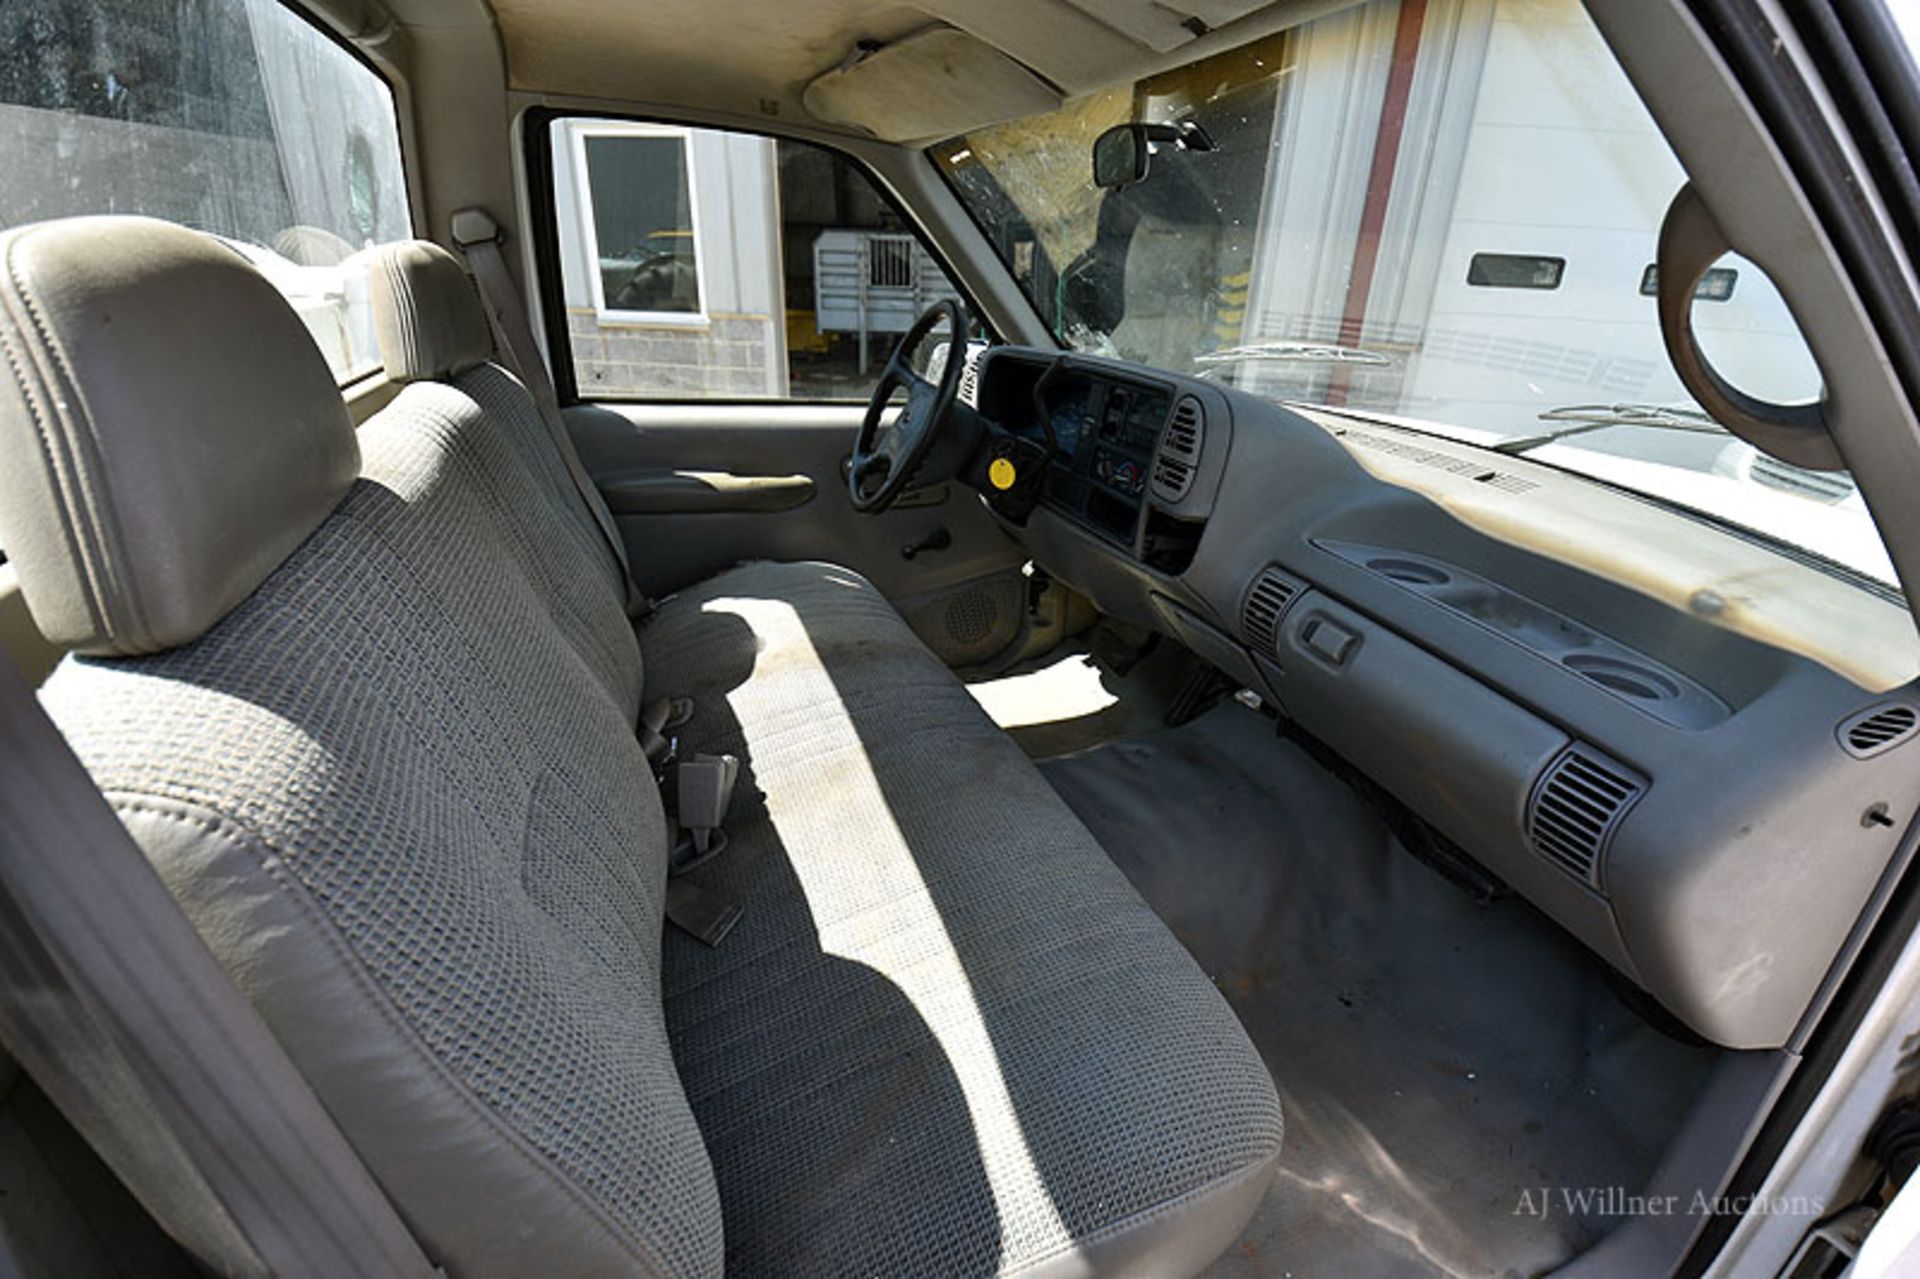 1995 Chevrolet 3500 Utility TruckVIN: 1GBGC34K2SE159122Miles: 222,760 Indicated On Odometer8' Bed - Image 7 of 7